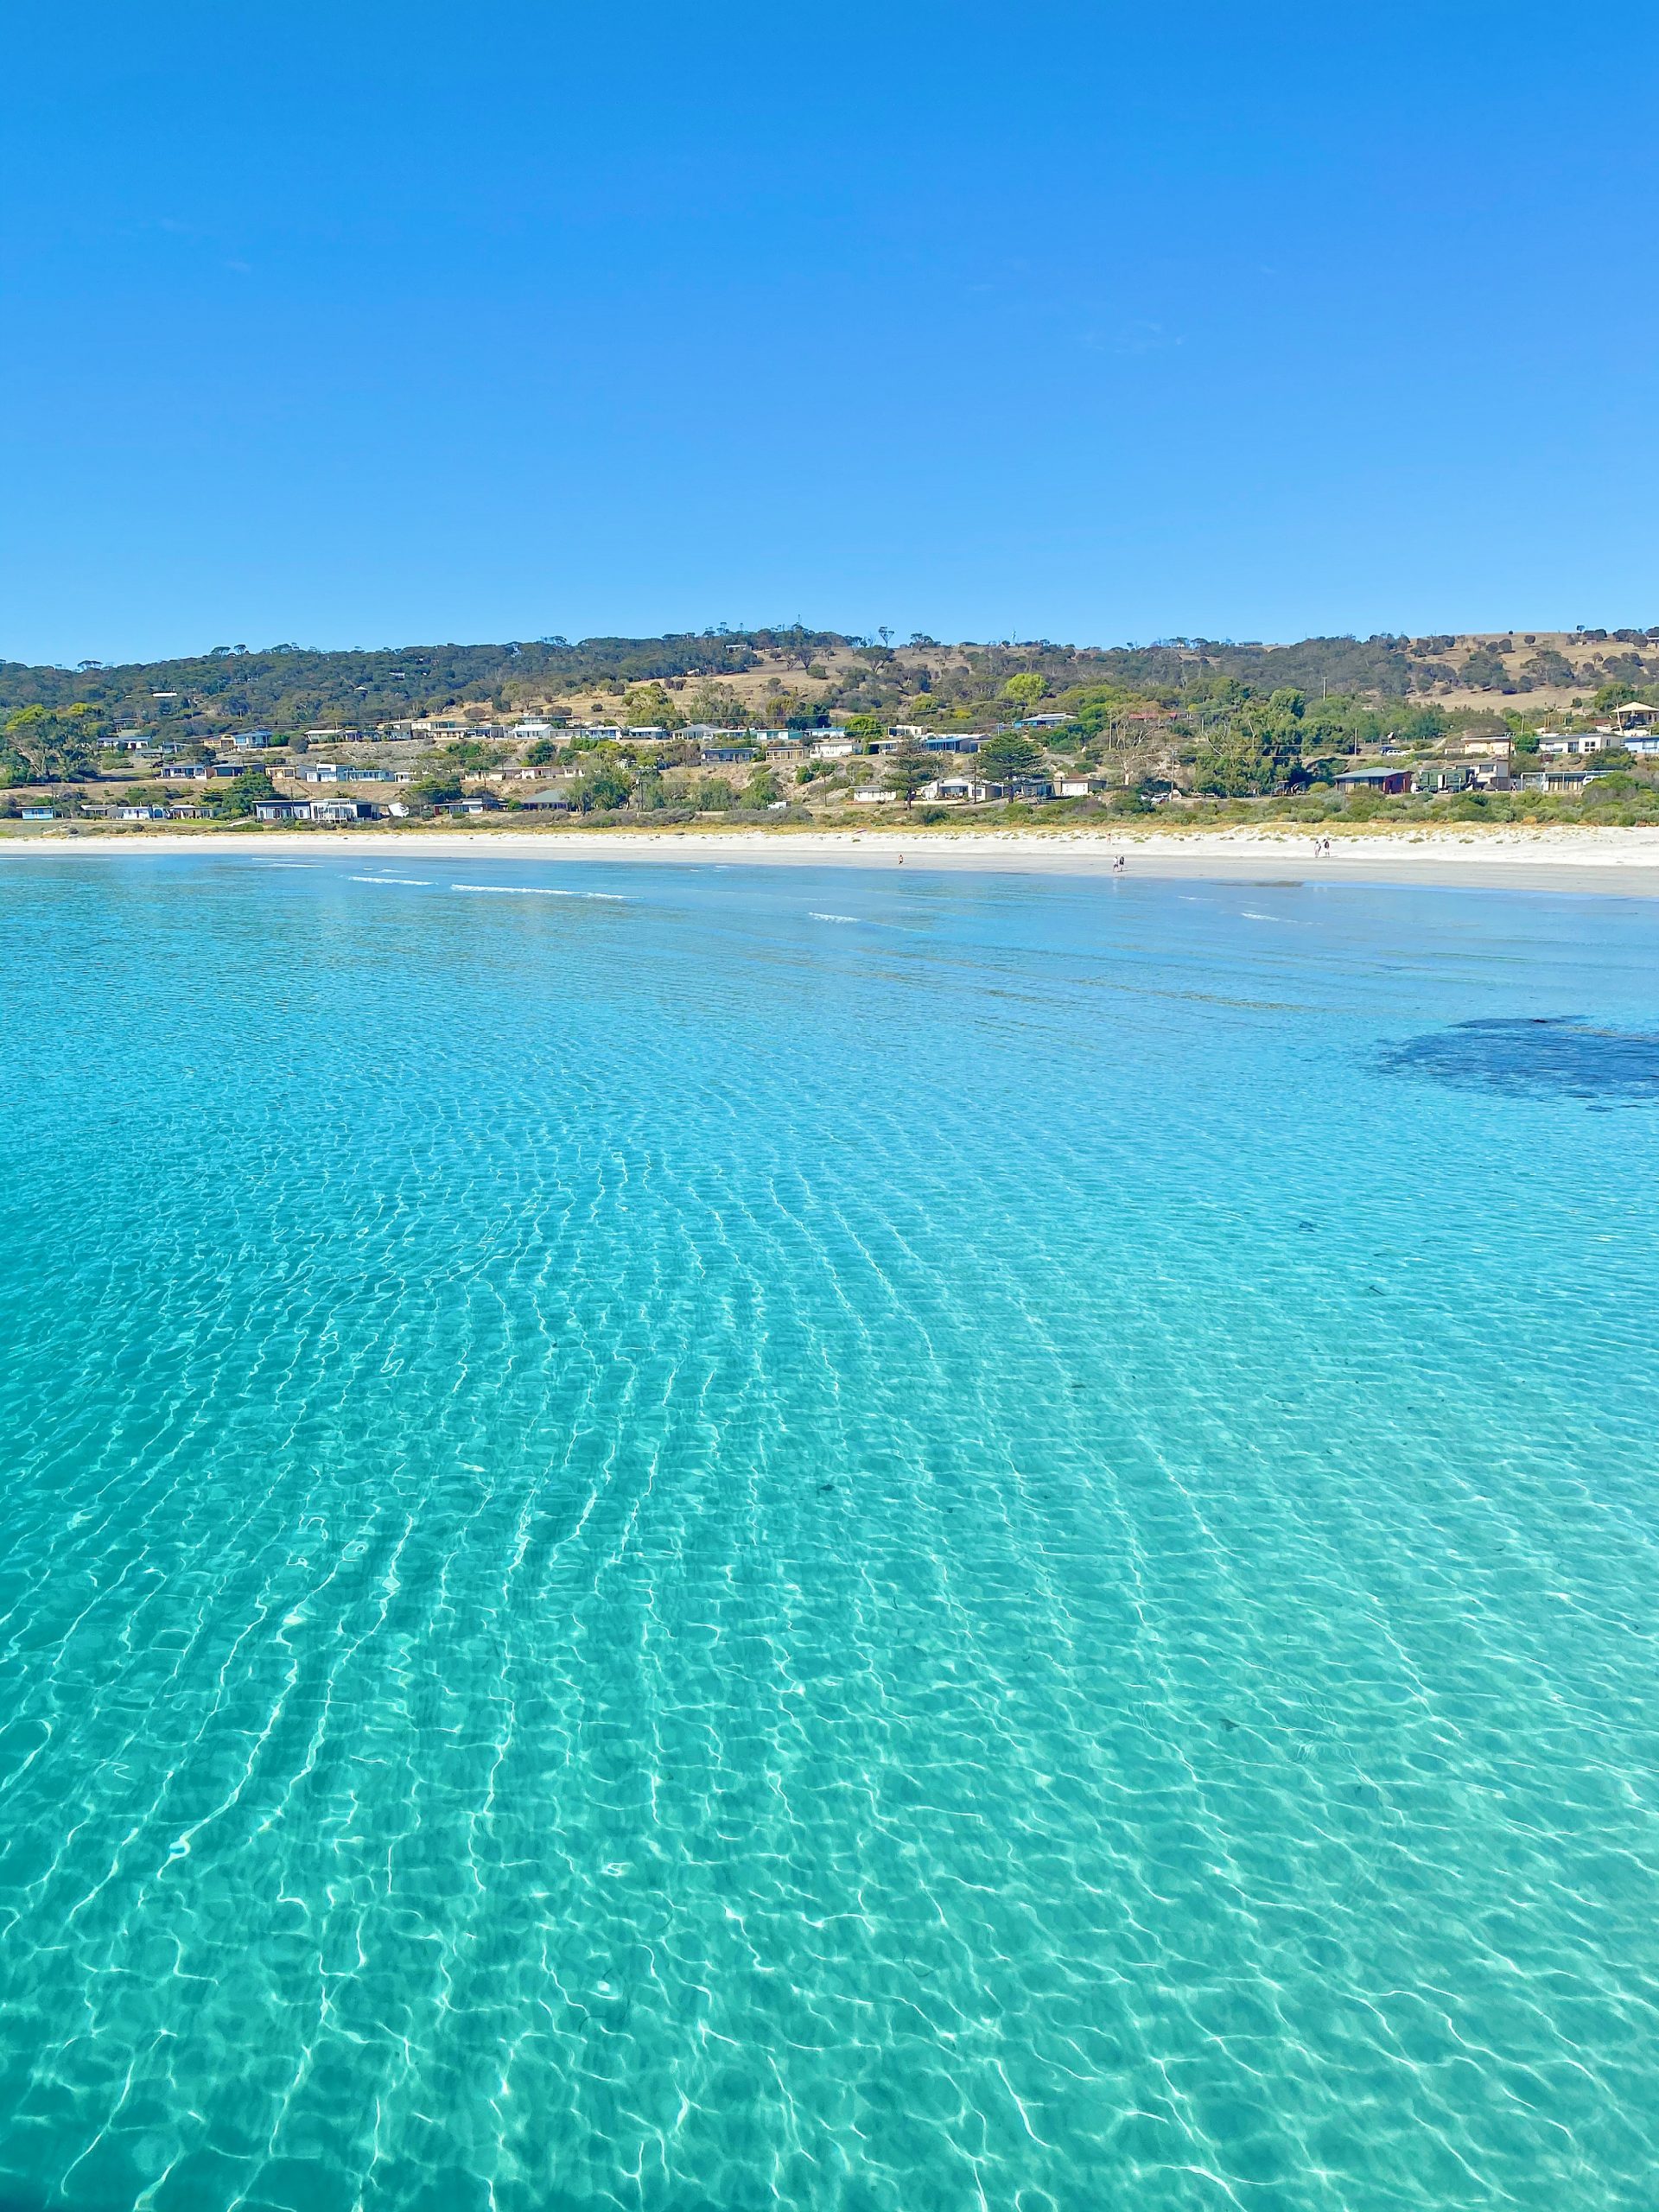 Sip and See Kangaroo Island with a once-in-a-lifetime experience!